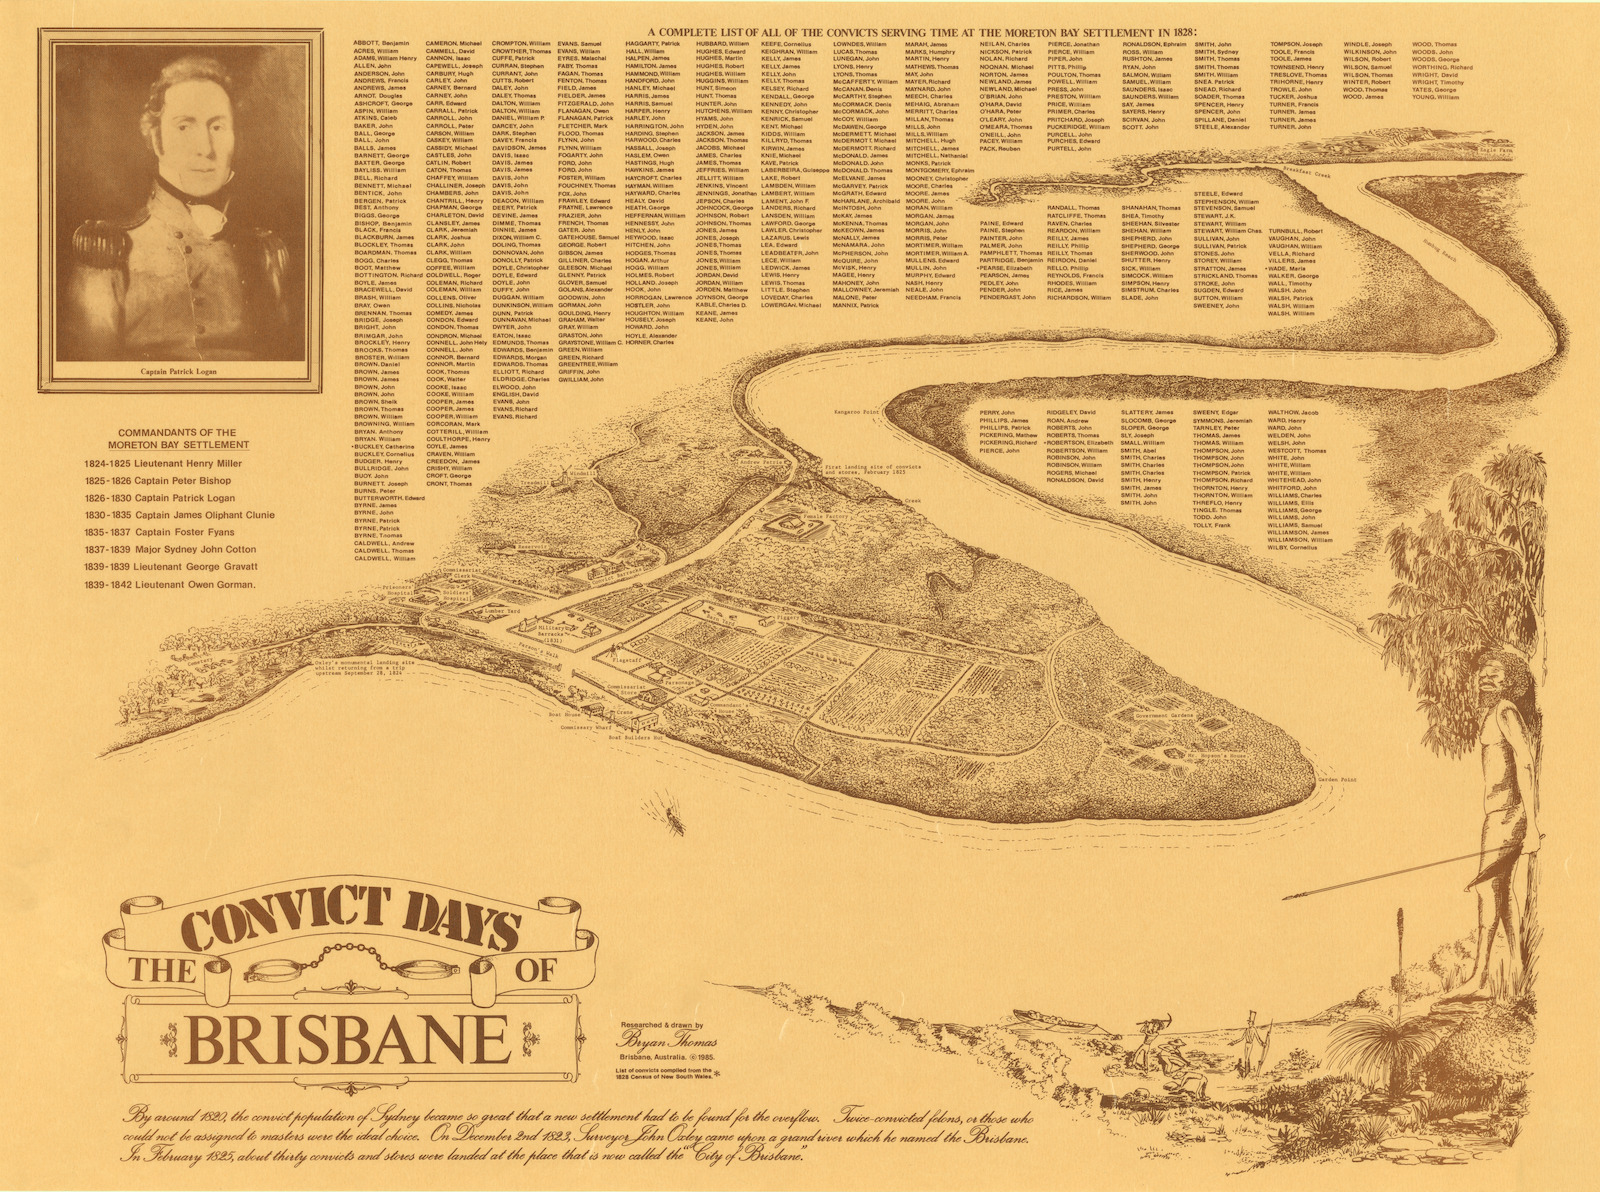 Drawing of Moreton Bay Settlement 1828 with list of convict names and image of Captain Patrick Logan in top left corner.